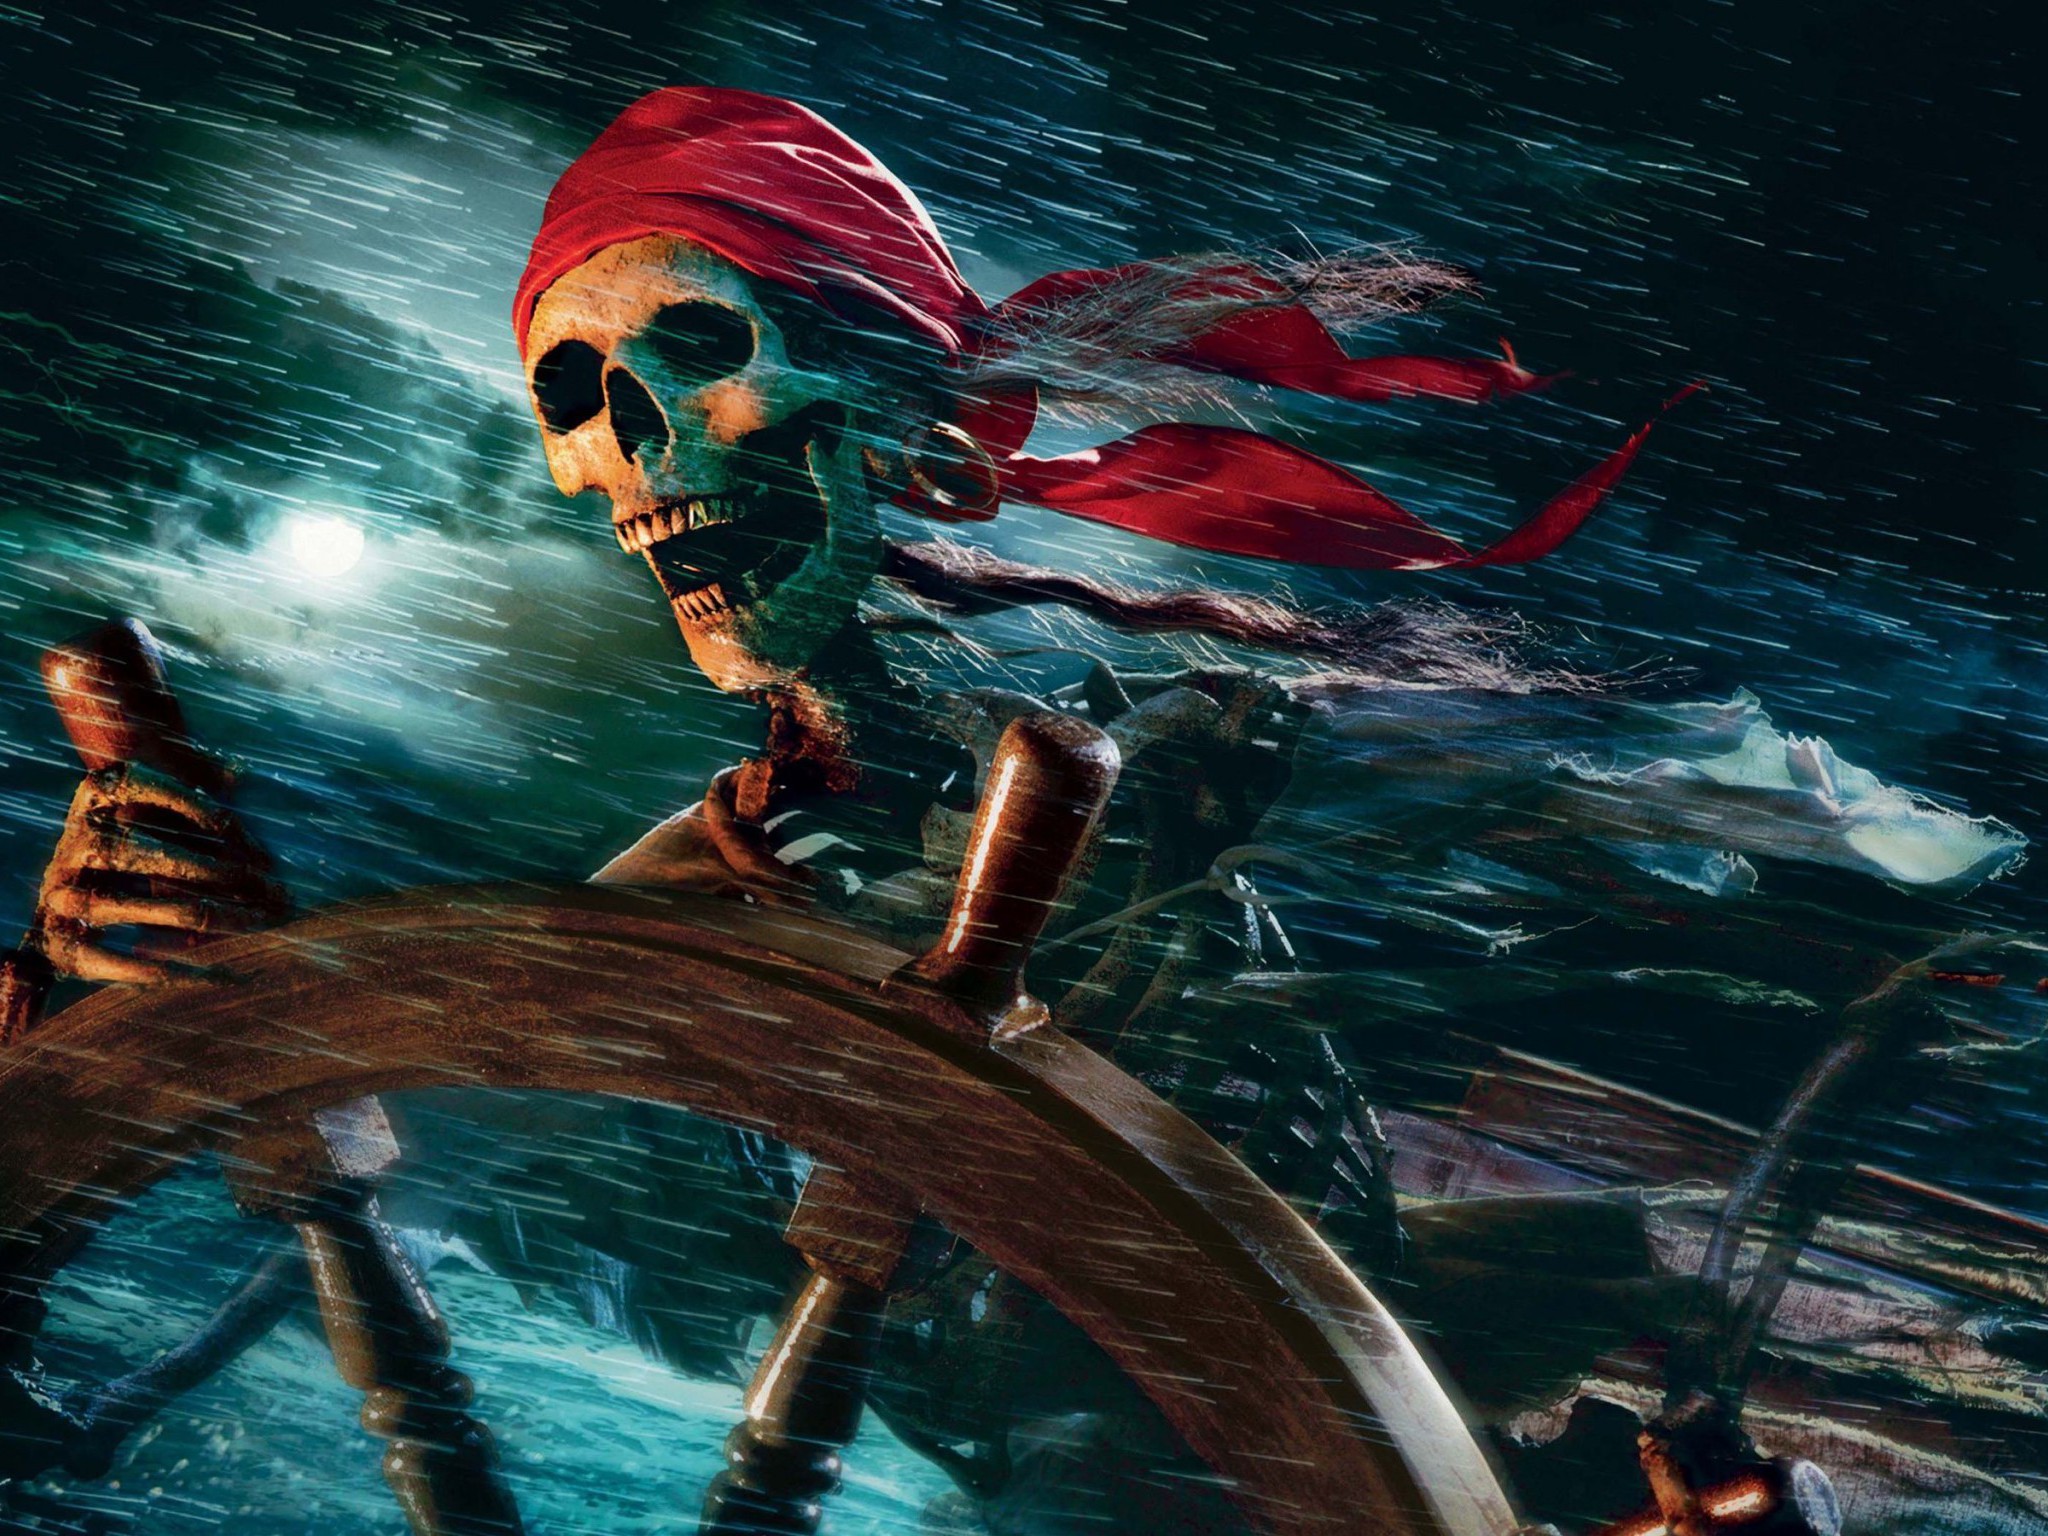 Skeleton Pirate At The Wheel - Hd Wallpapers 2560 X 1080 Pirate - HD Wallpaper 